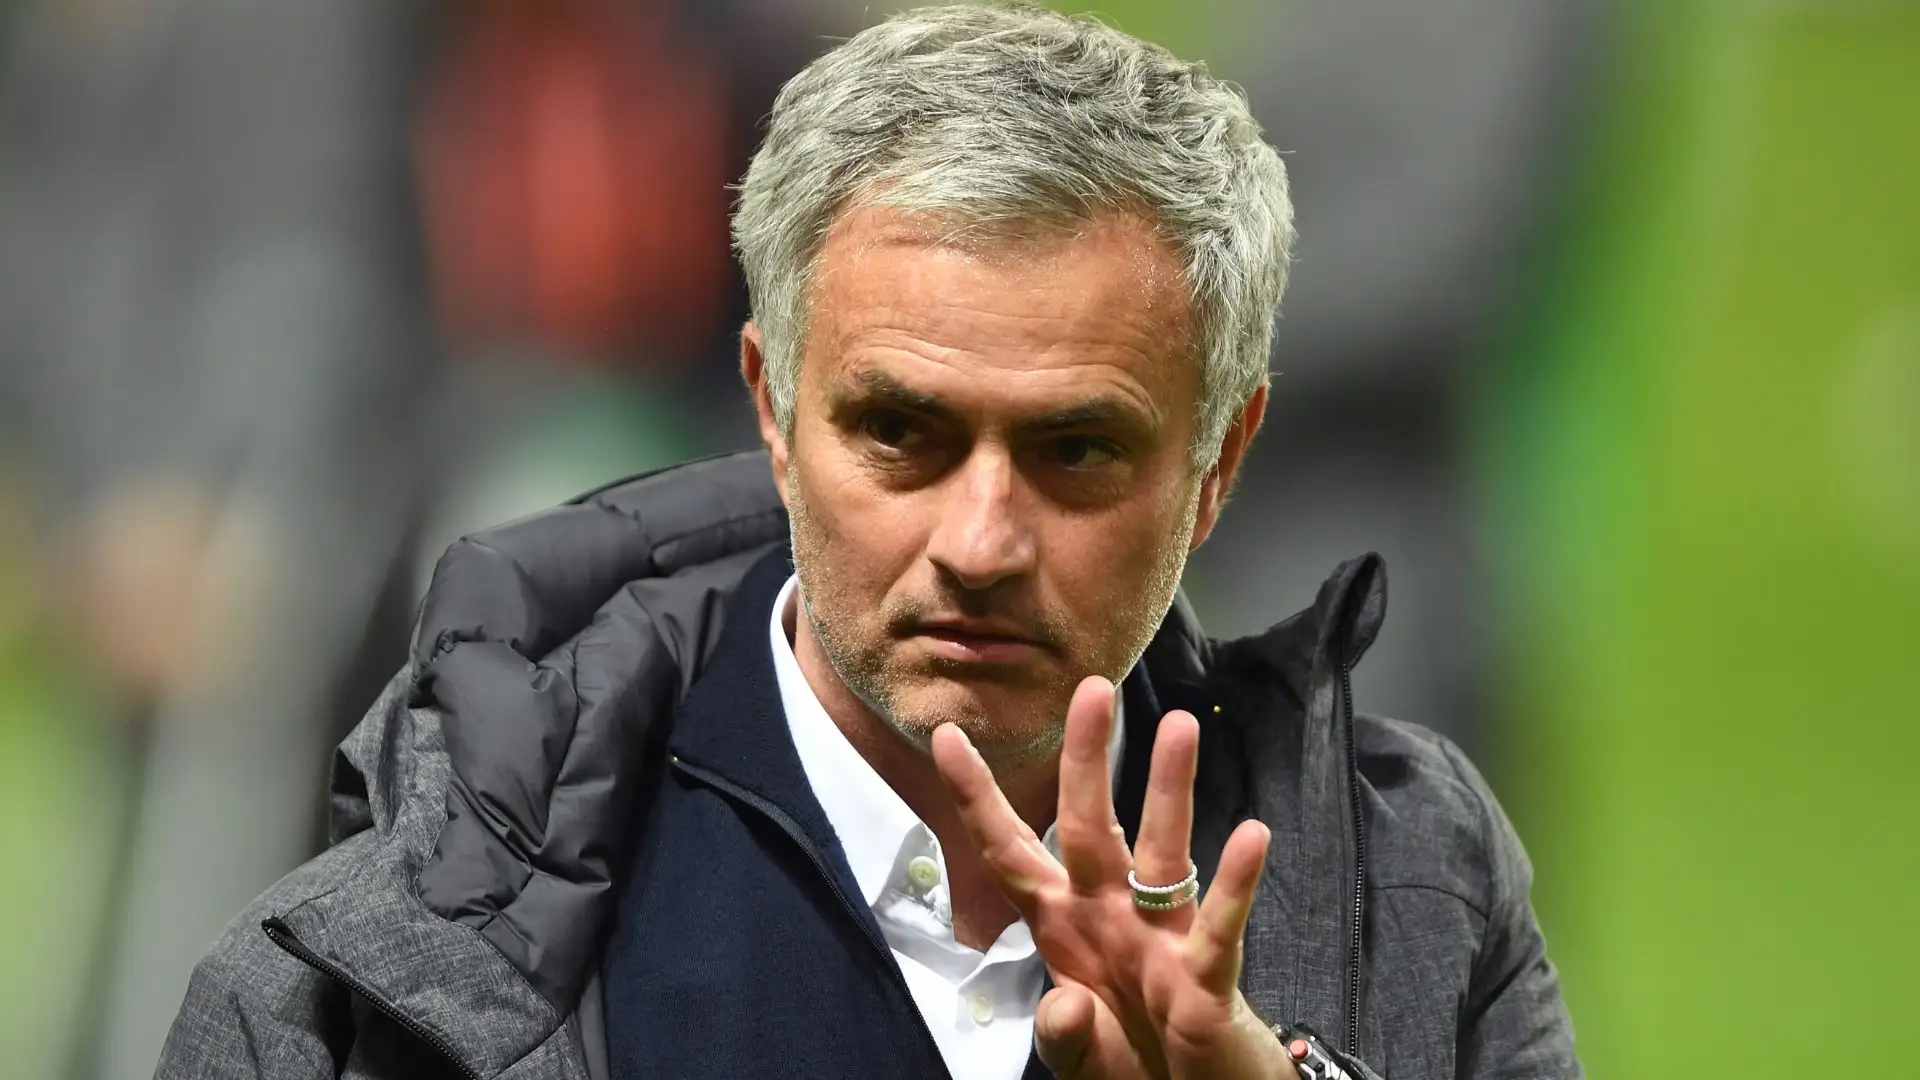 A new job for Jose Mourinho? Fenerbahce presidential candidate promises to deliver ex-Chelsea & Man Utd boss after revealing positive talks